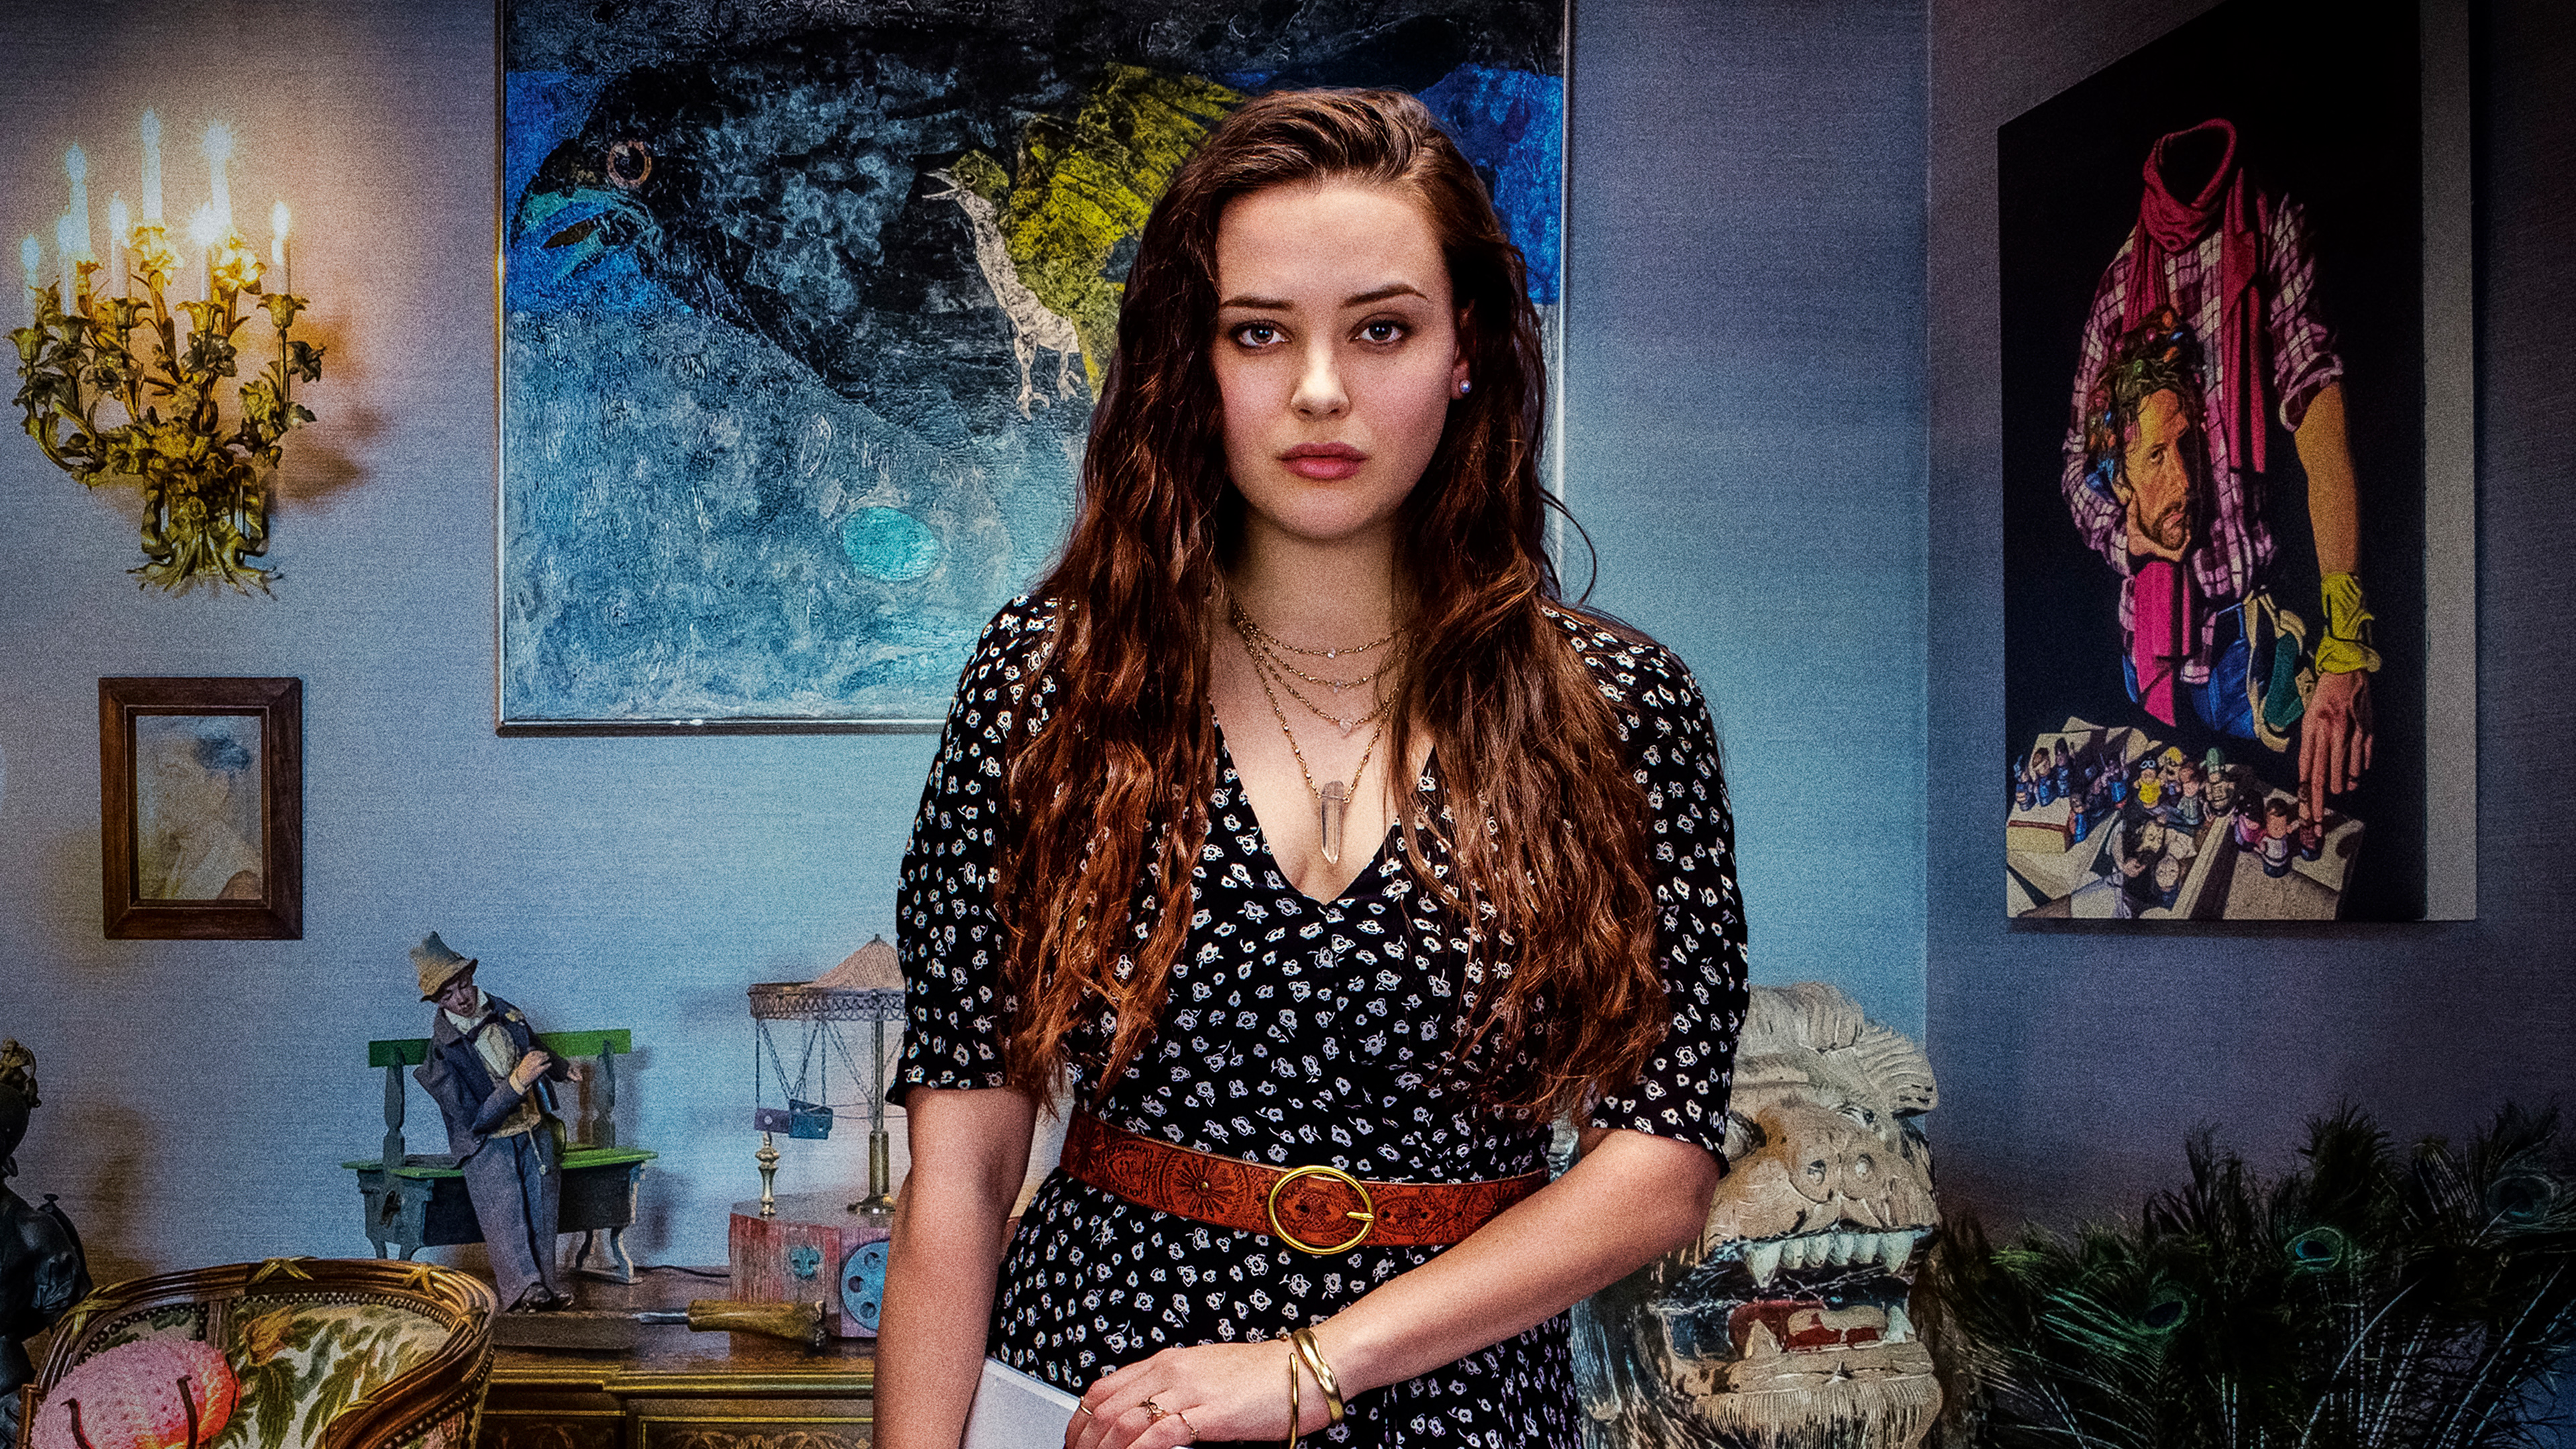 Katherine Langford in Knives Out 2019 4K Wallpaper.